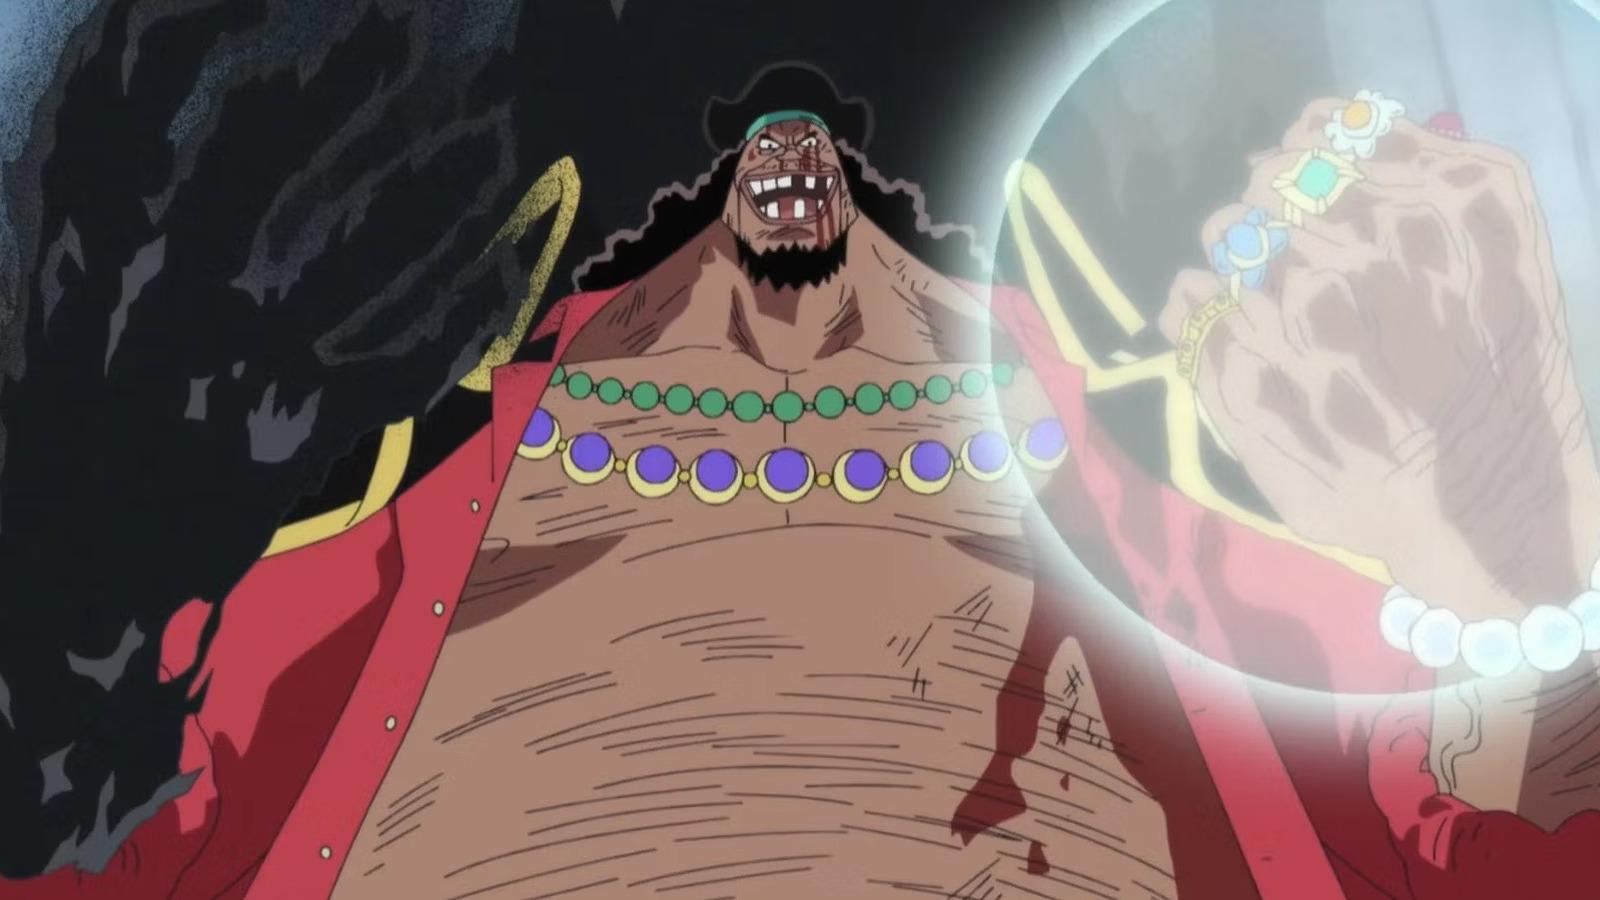 An image featuring the powers of Blackbeard's devil fruits in One Piece